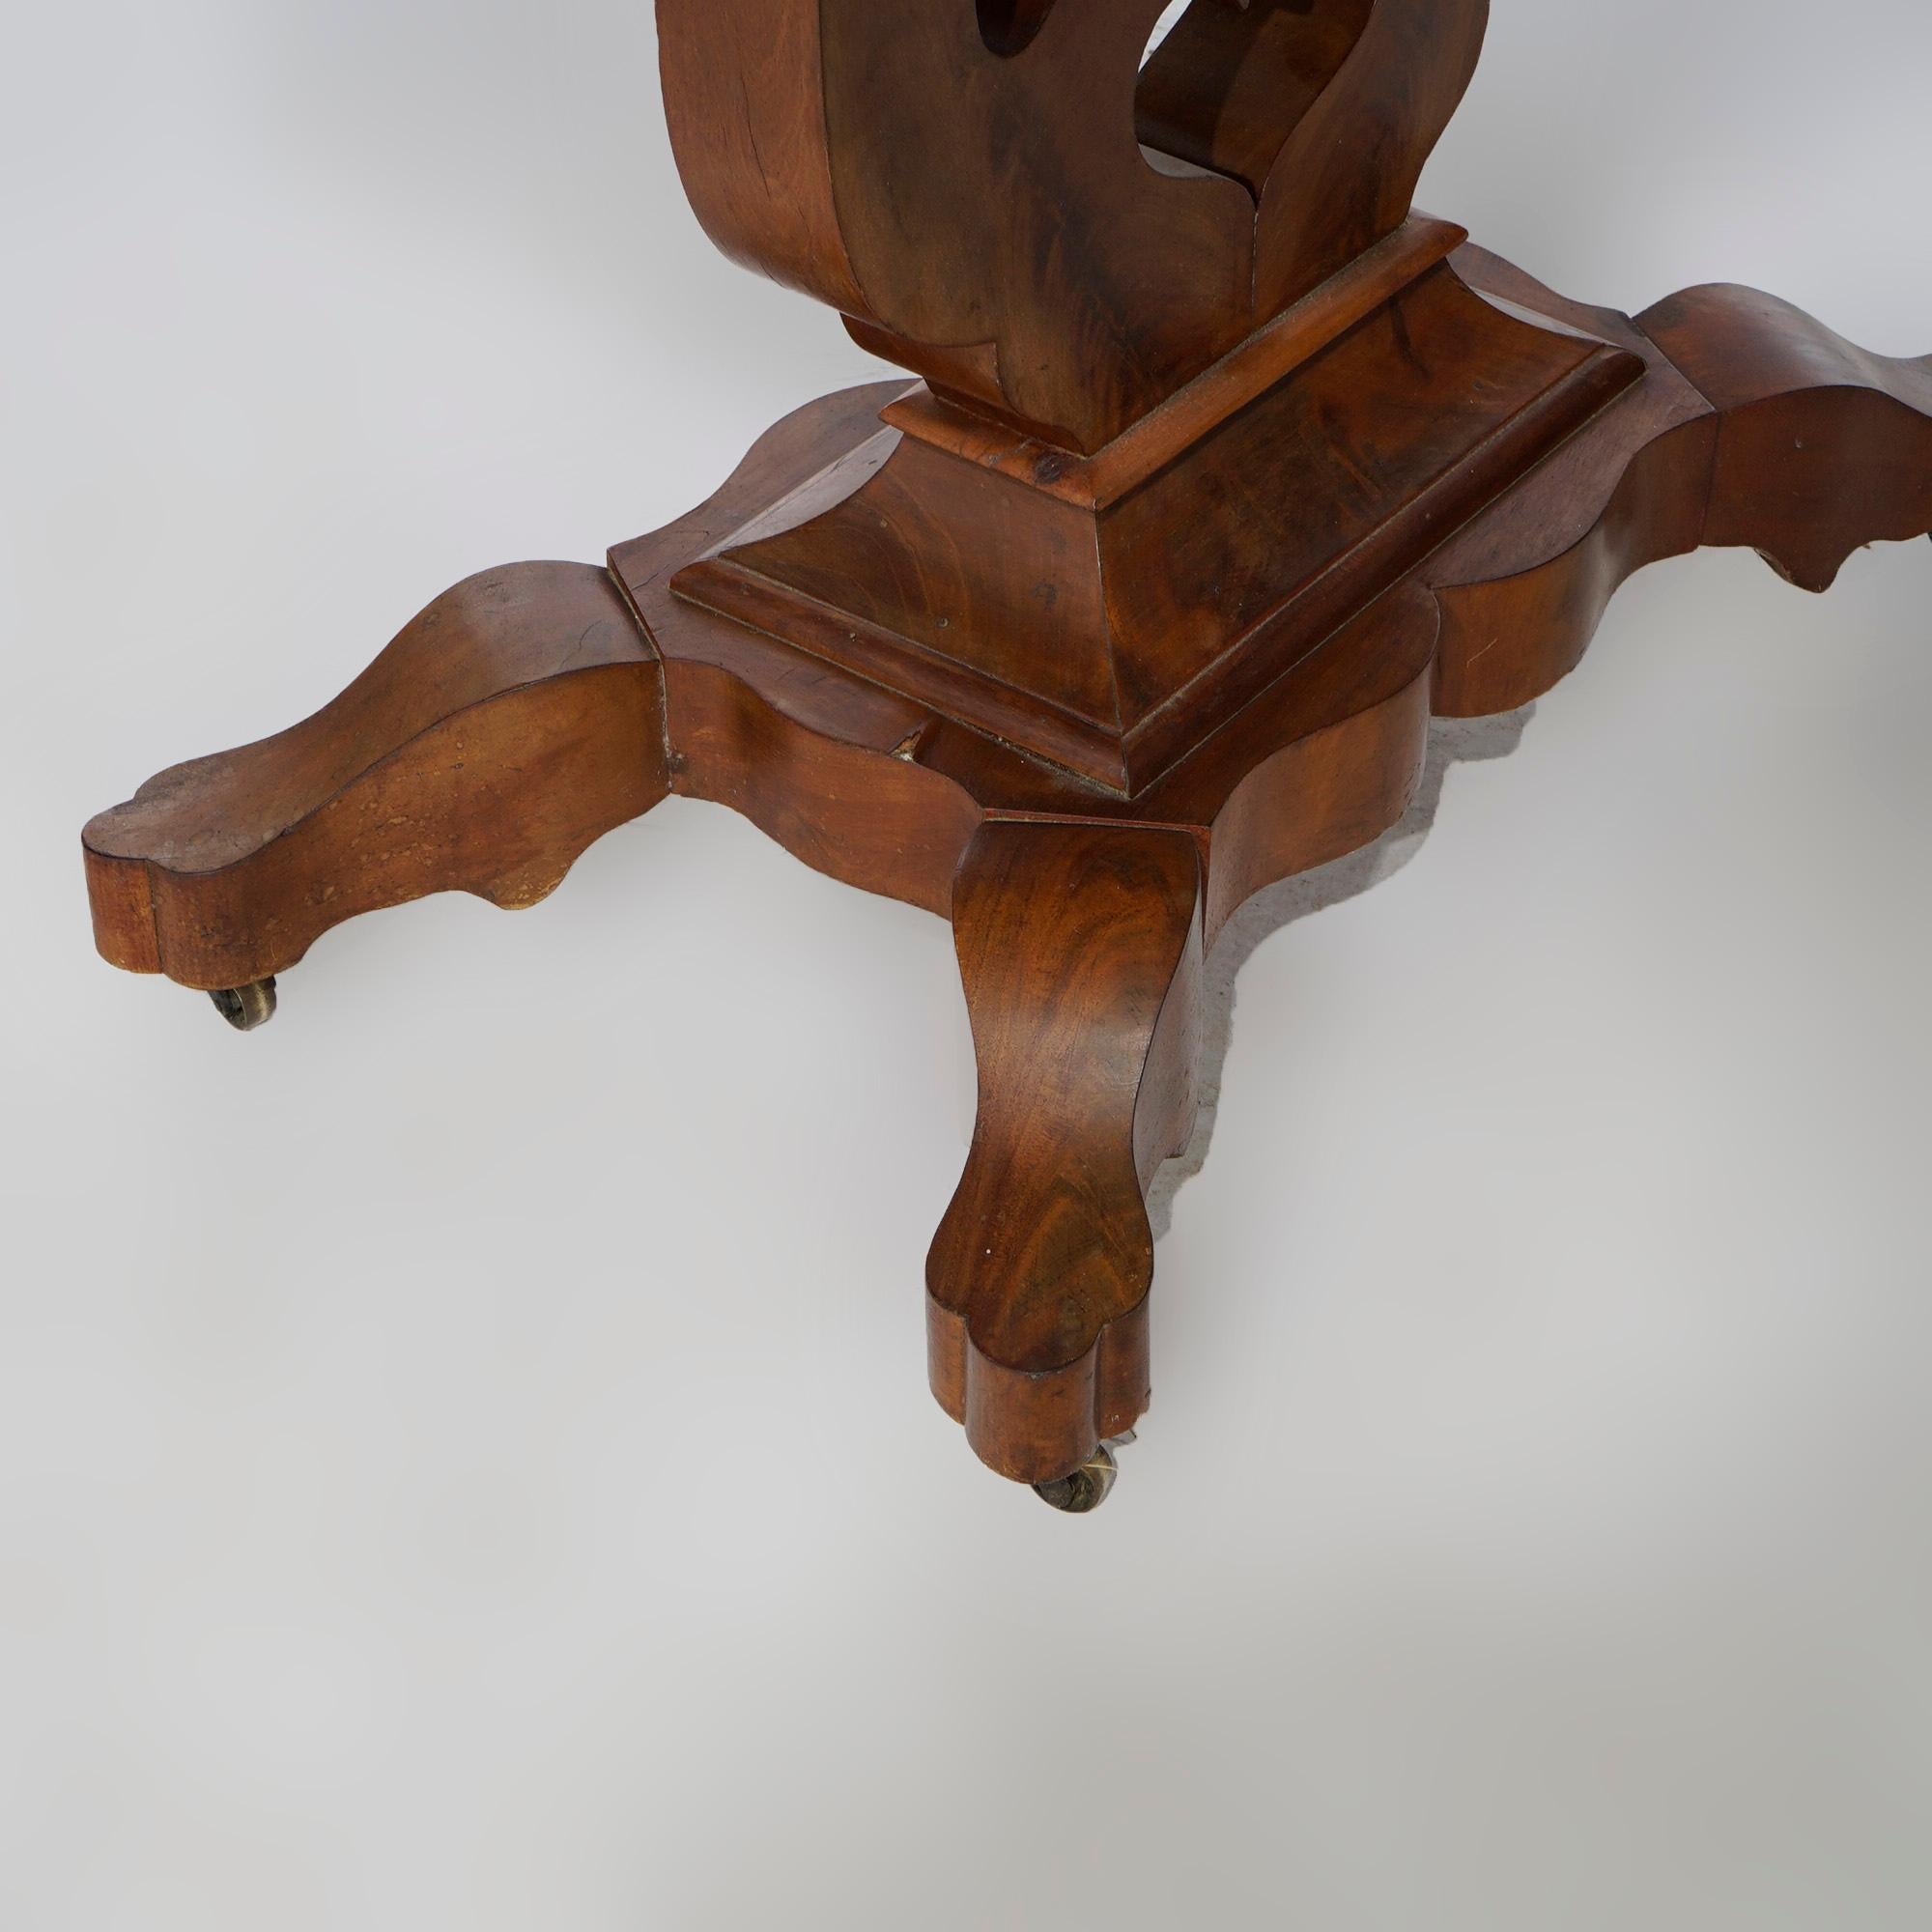 Antique Neoclassical Flame Mahogany & Marble Lyre Turtle Top Parlor Table c1880 For Sale 7